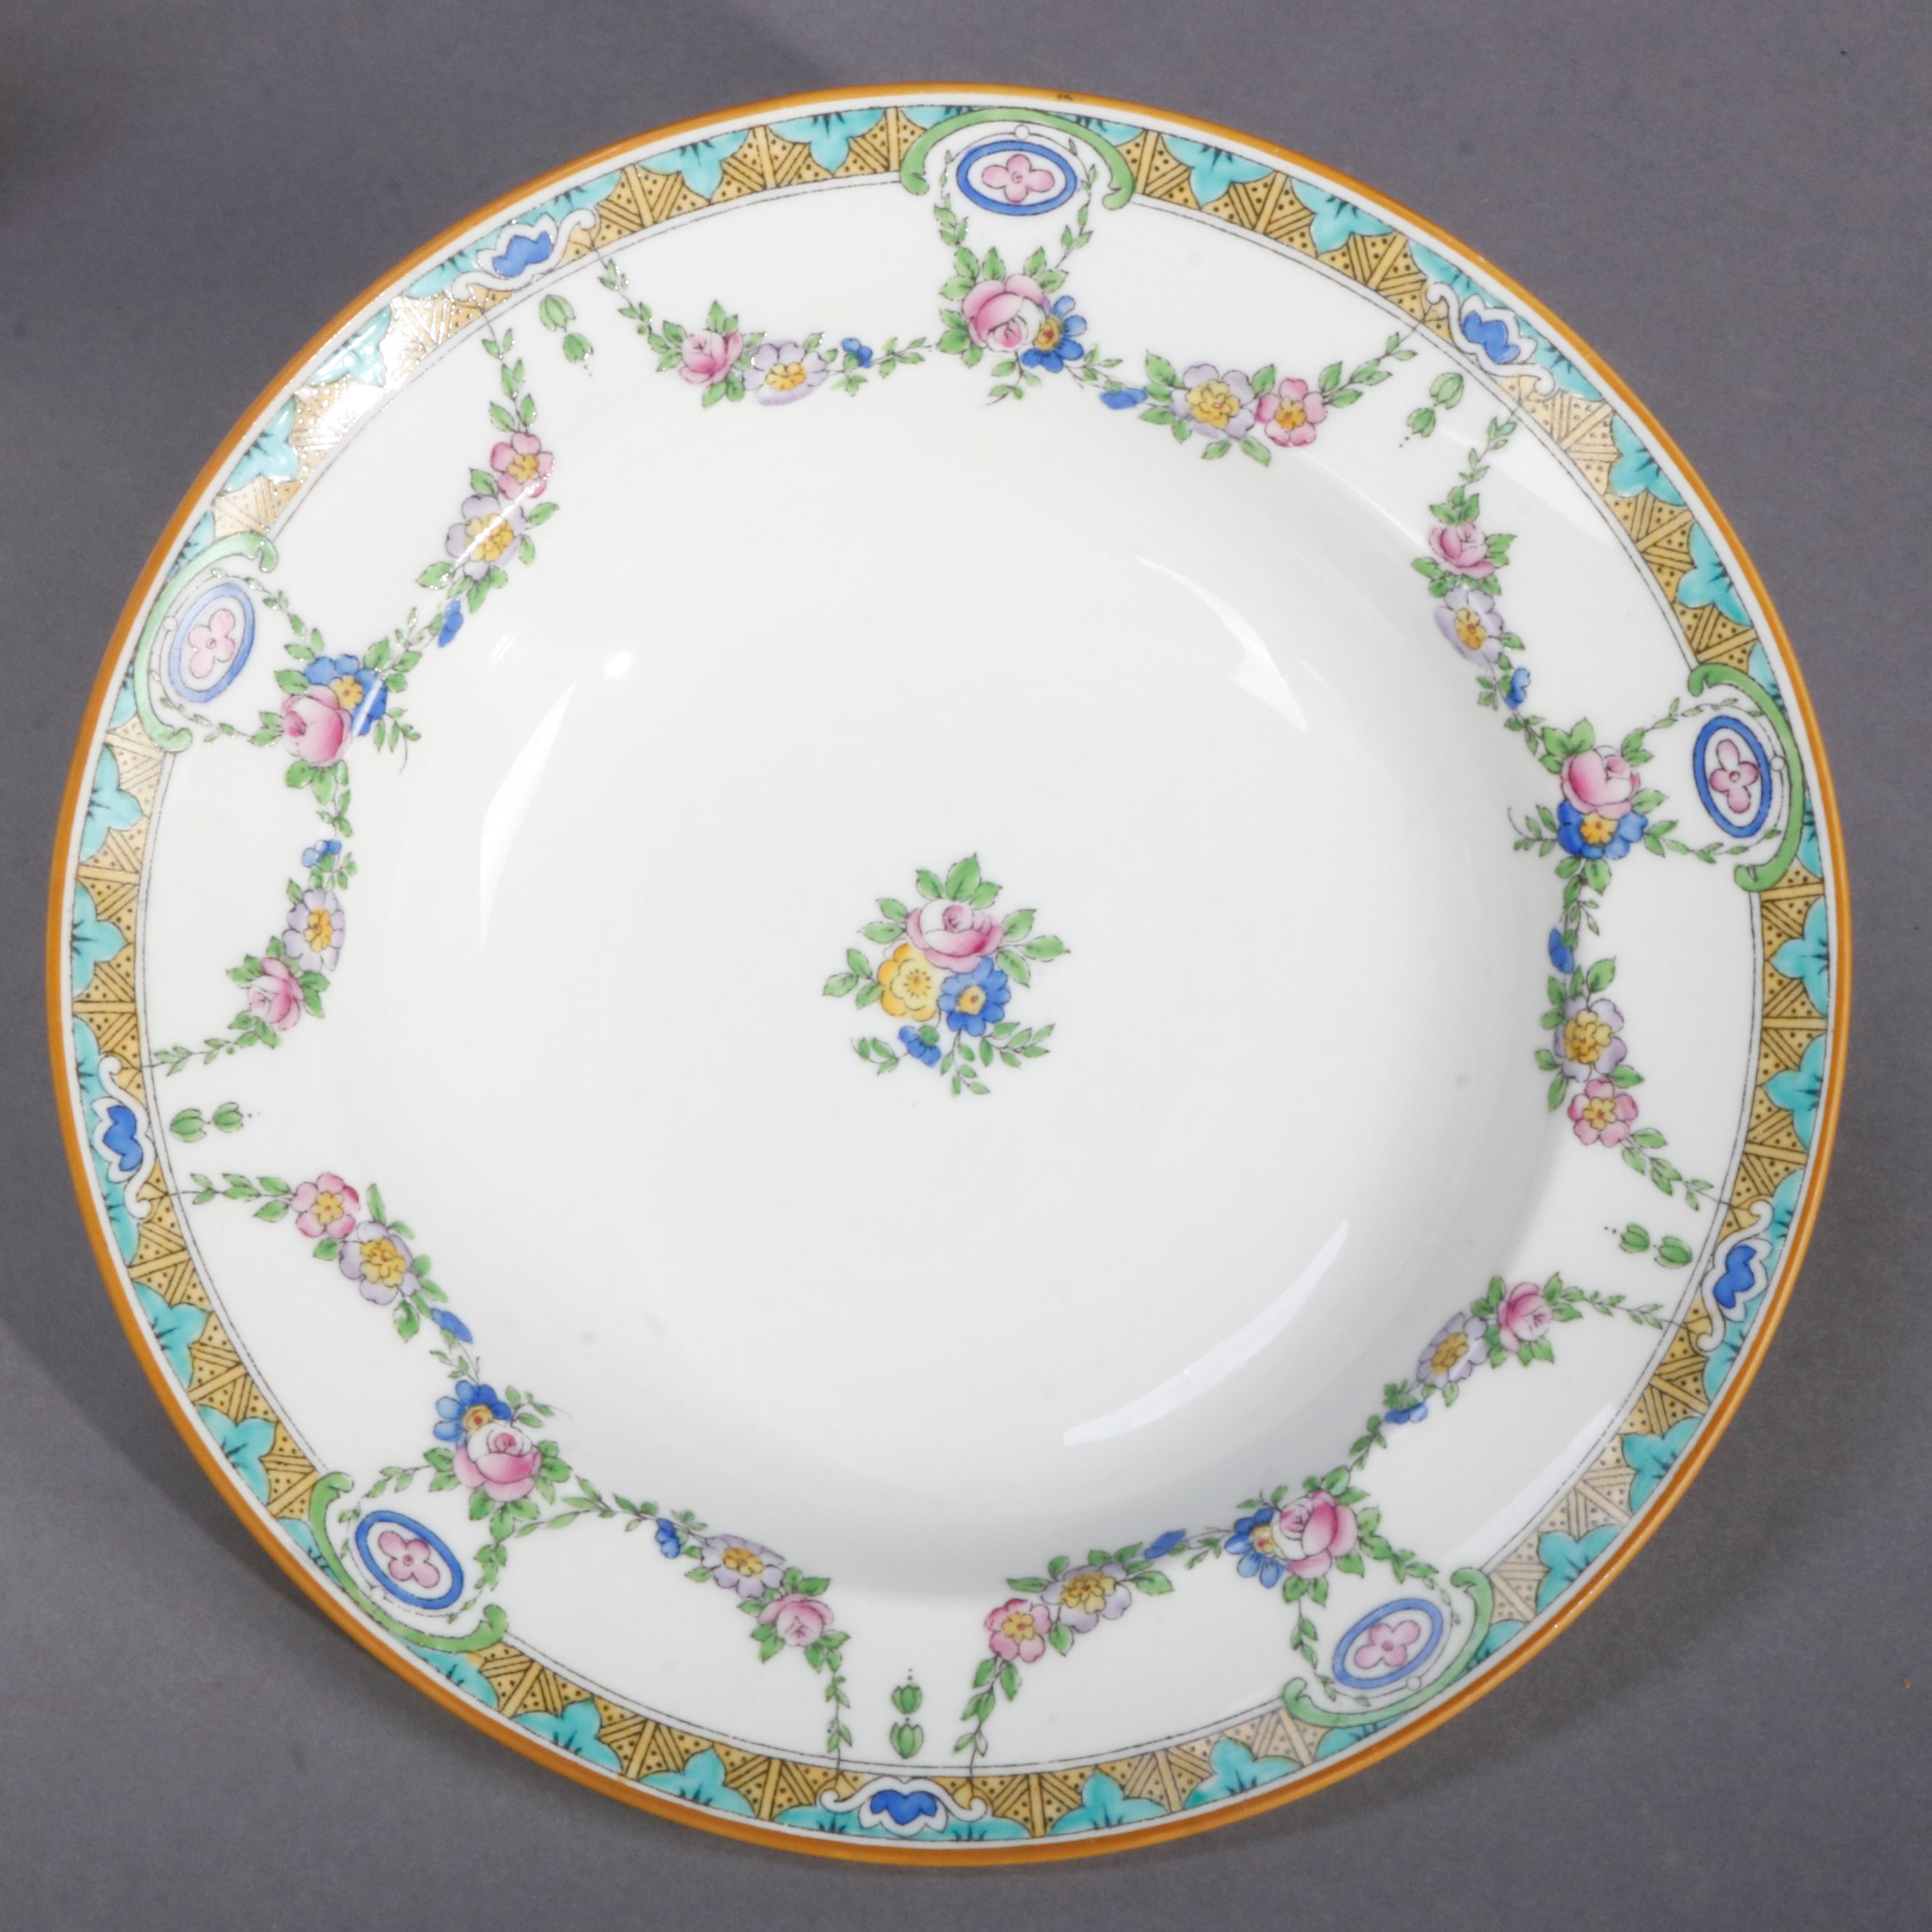 A set of 11 English Mintons Fine China wide rim bowls feature rim with floral swag and stylized foliate border, central floral spray, en verso crown maker mark as photographed, 20th century

Measures- 1.5